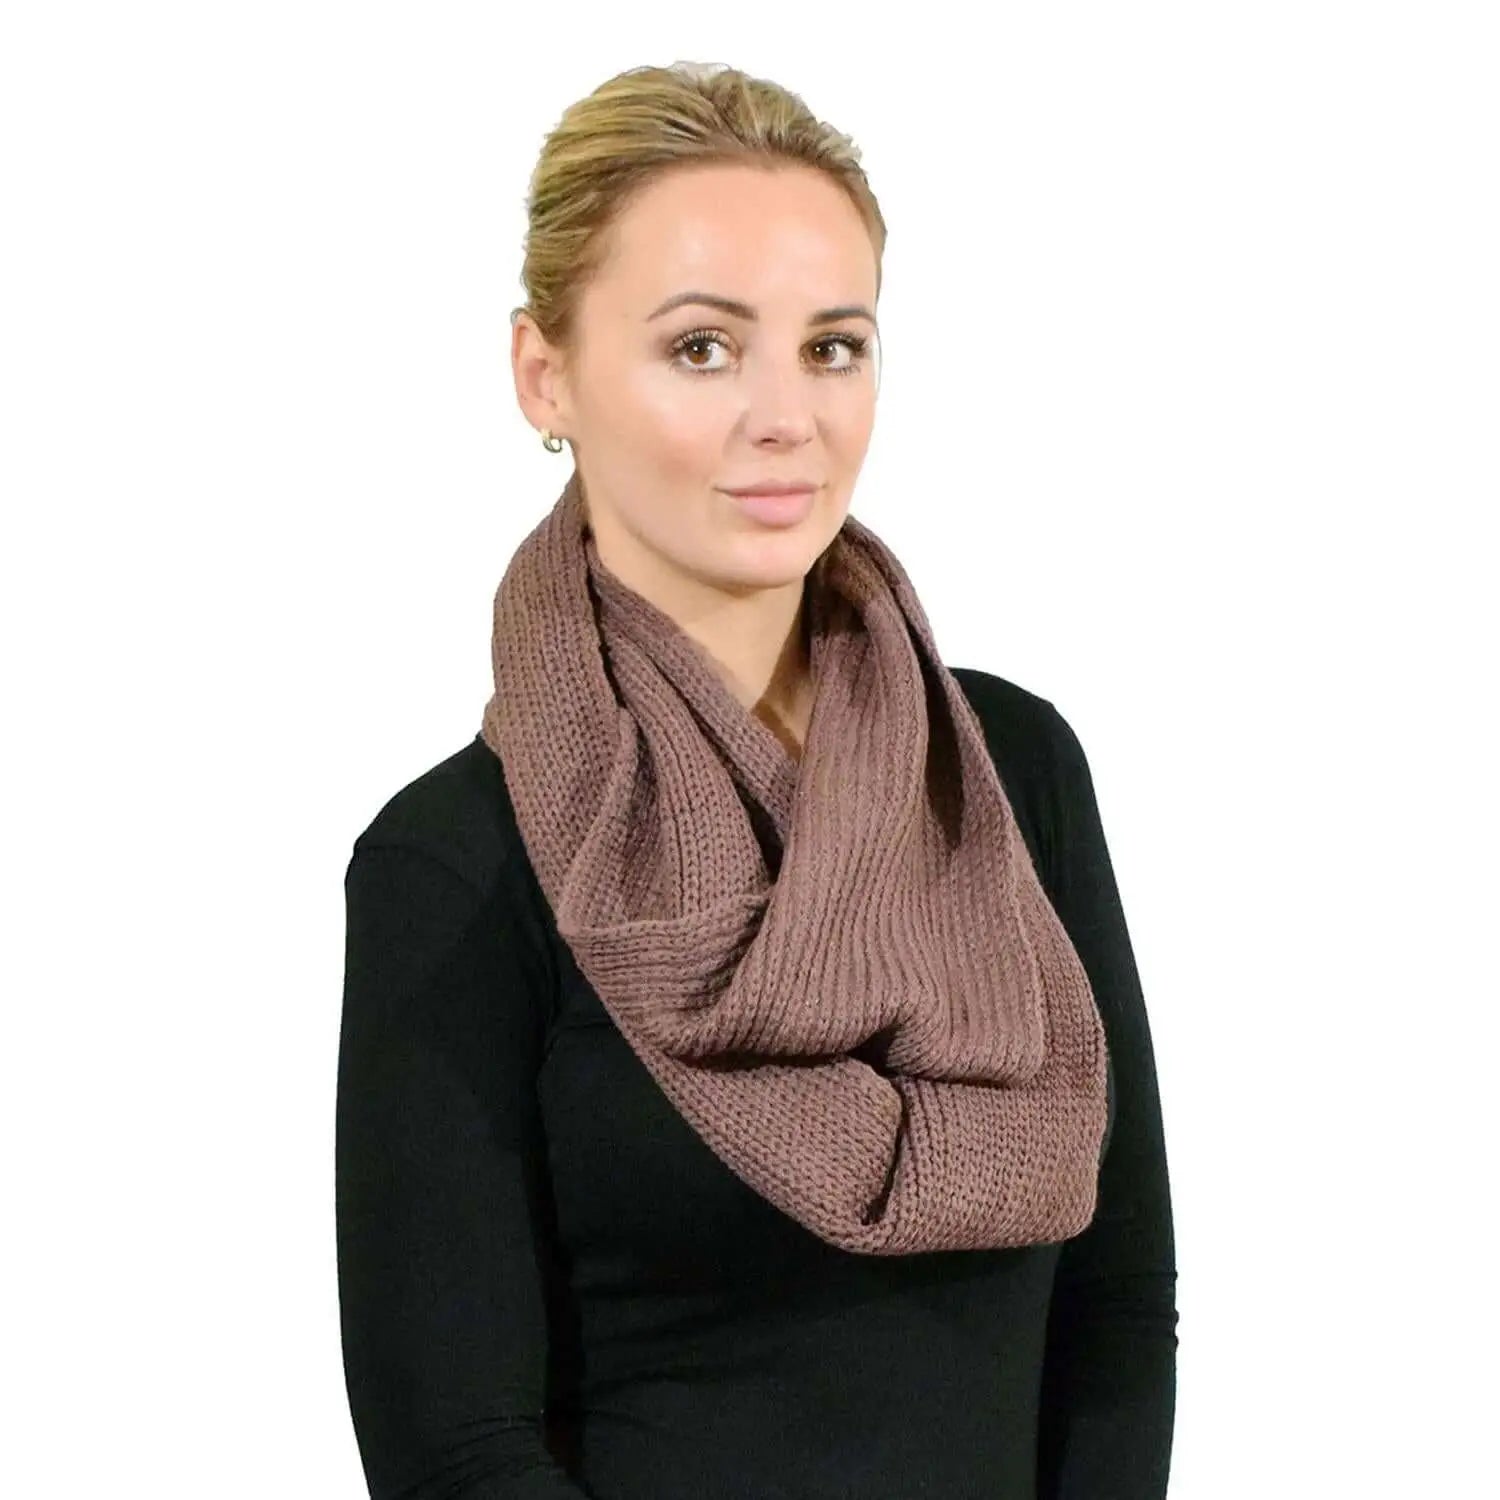 Woman wearing a brown plain knitted snood.